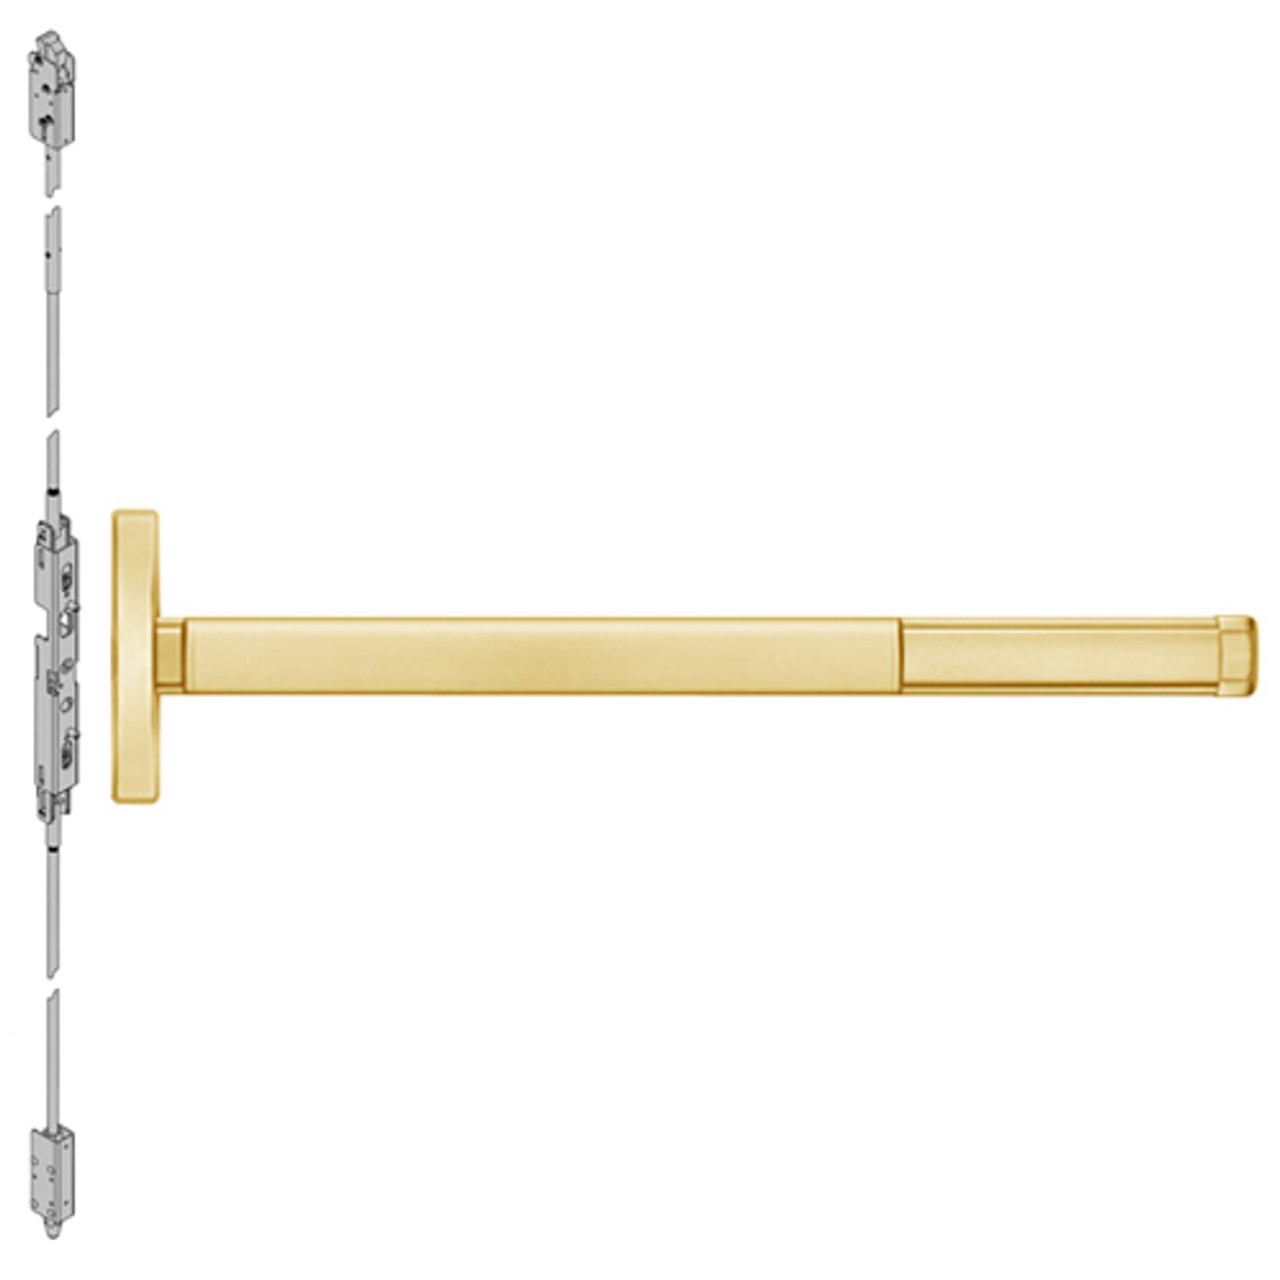 MLRFL2601-605-48 PHI 2600 Series Fire Rated Concealed Vertical Rod Exit Device with Motorized Latch Retraction Prepped for Cover Plate in Bright Brass Finish